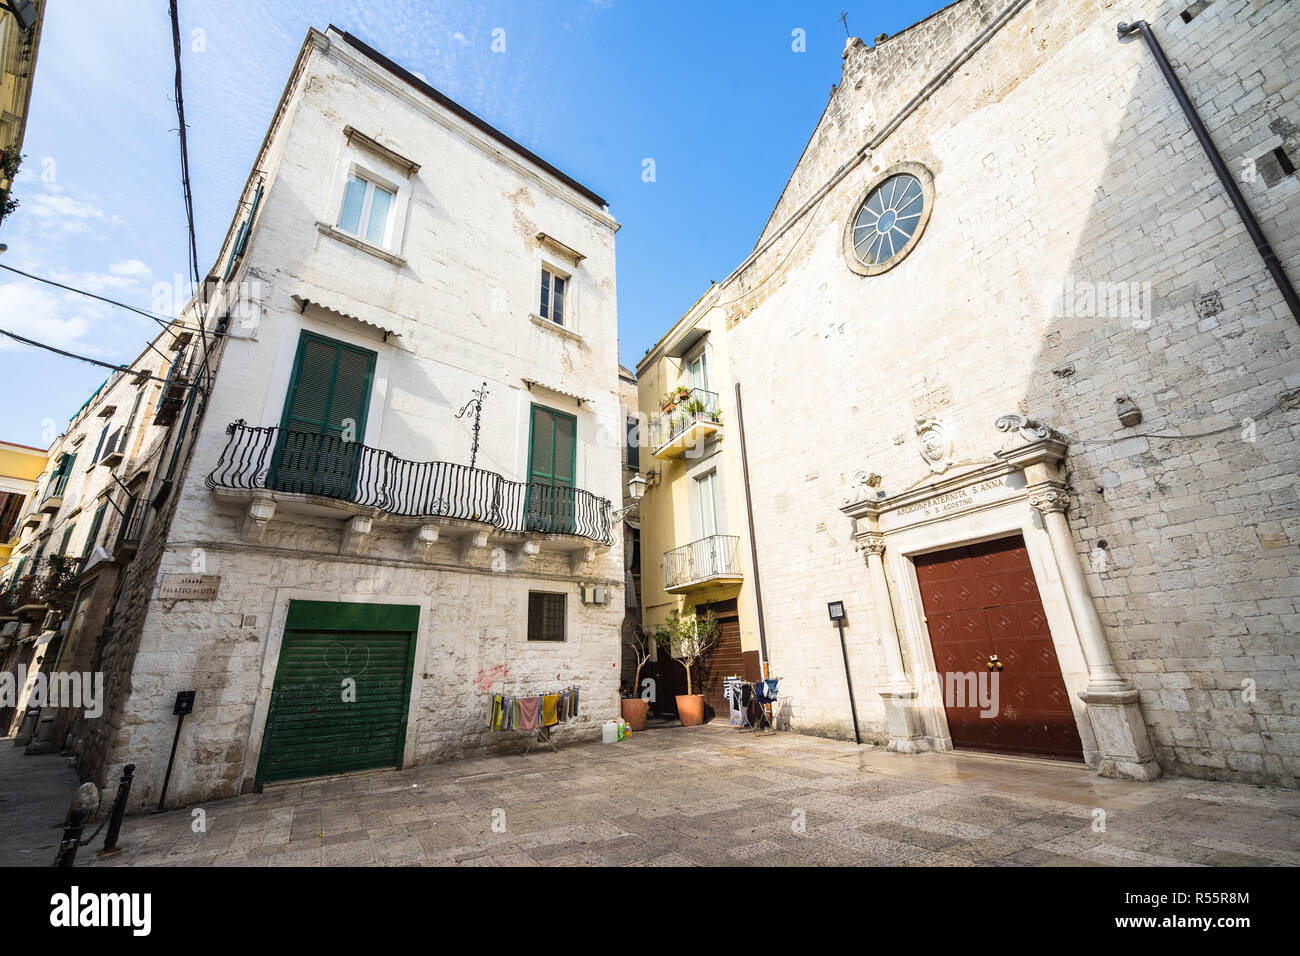 Small square with a traditional building and a small church in Bari old town (called in Italian 'Bari Vecchia'), Apulia, Italy Stock Photo